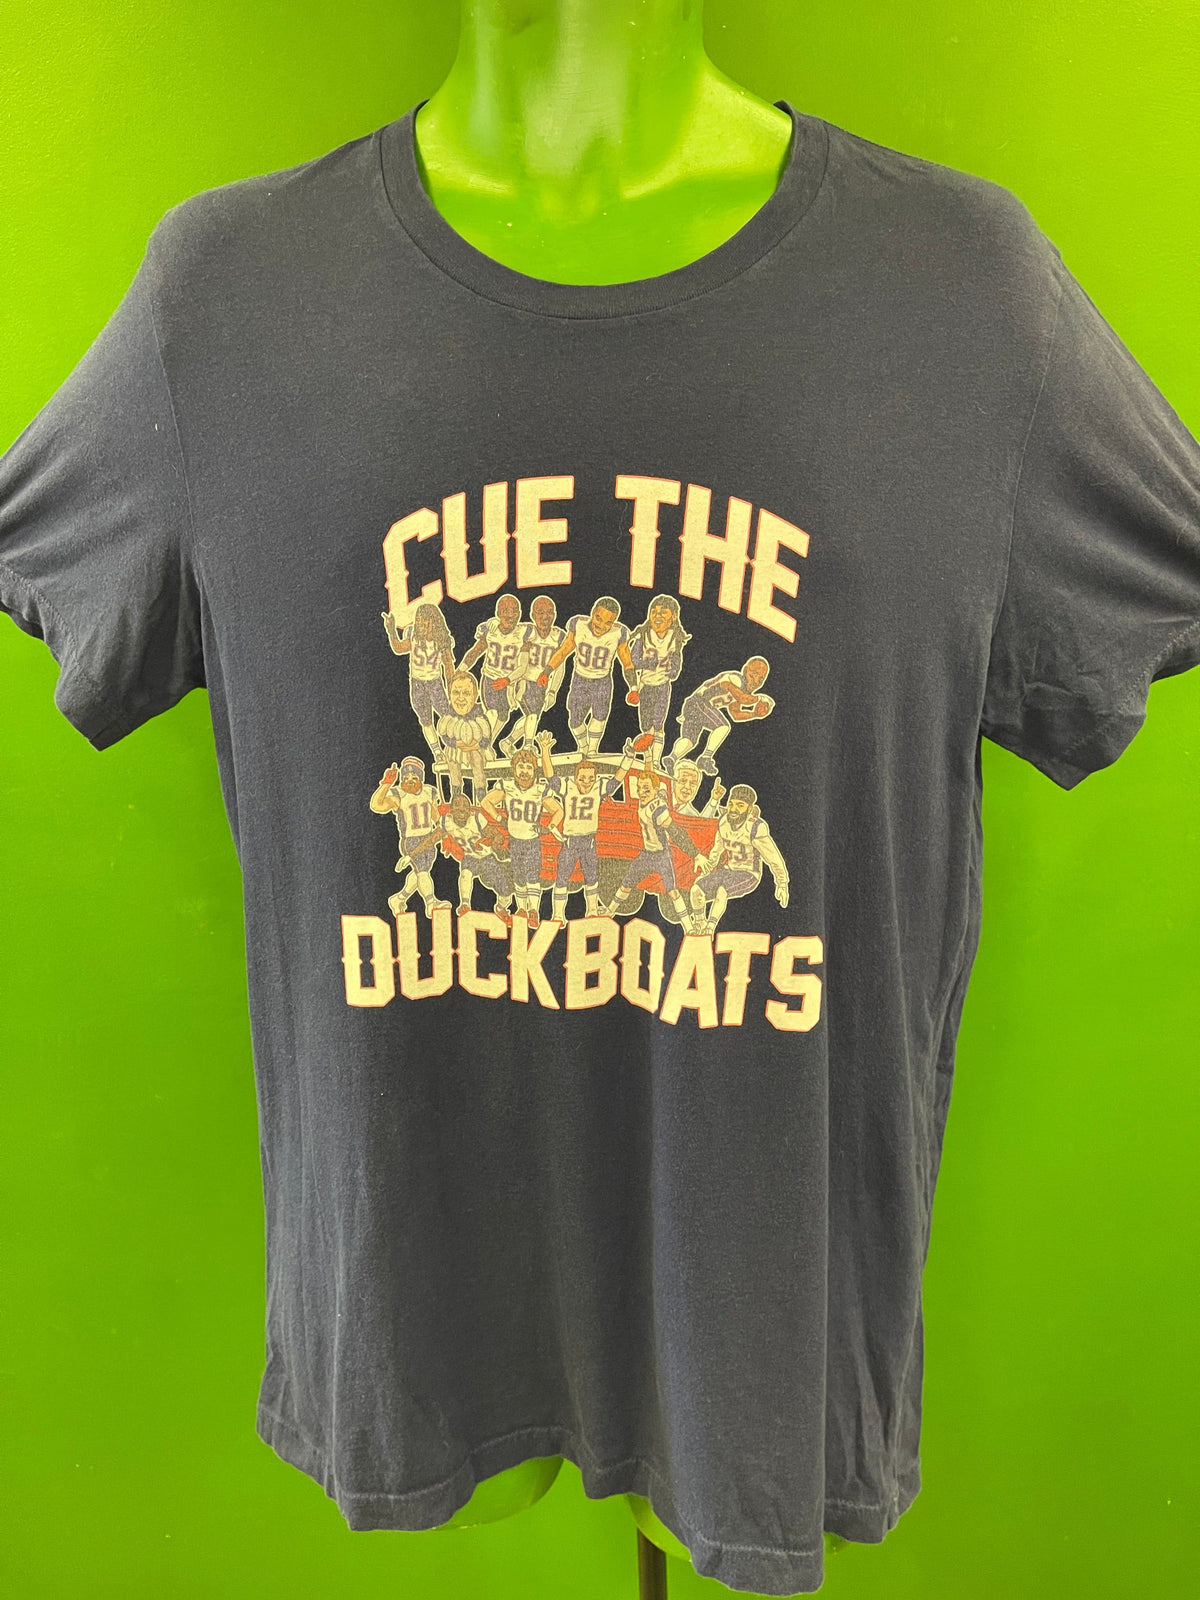 NFL New England Patriots "Cue the Duck Boats" T-Shirt Men's Large